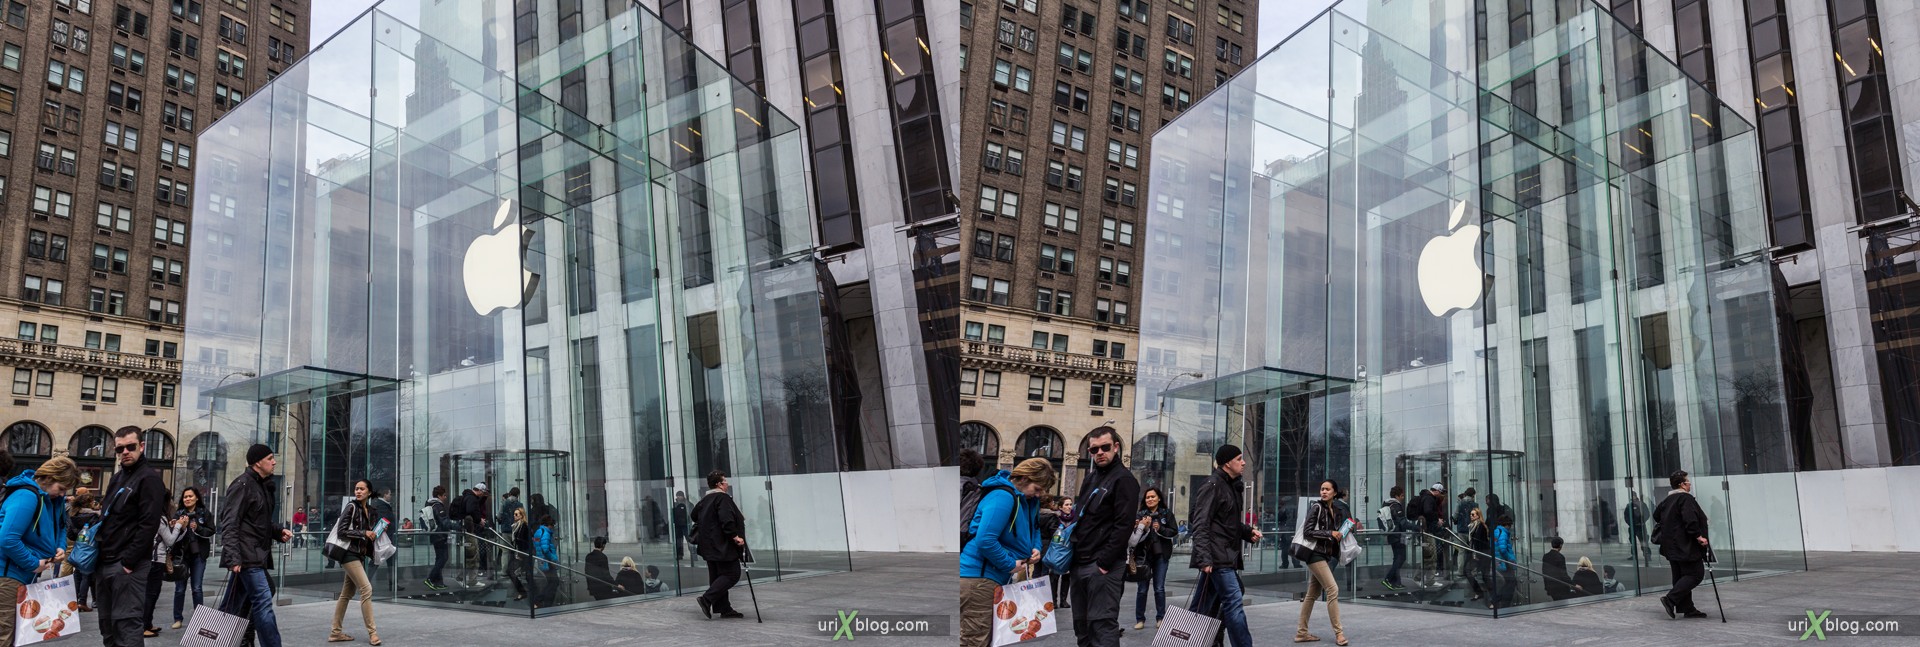 2013, Apple, Apple Store, Fifth Avenue, NYC, New York, USA, 3D, stereo pair, cross-eyed, crossview, cross view stereo pair, stereoscopic